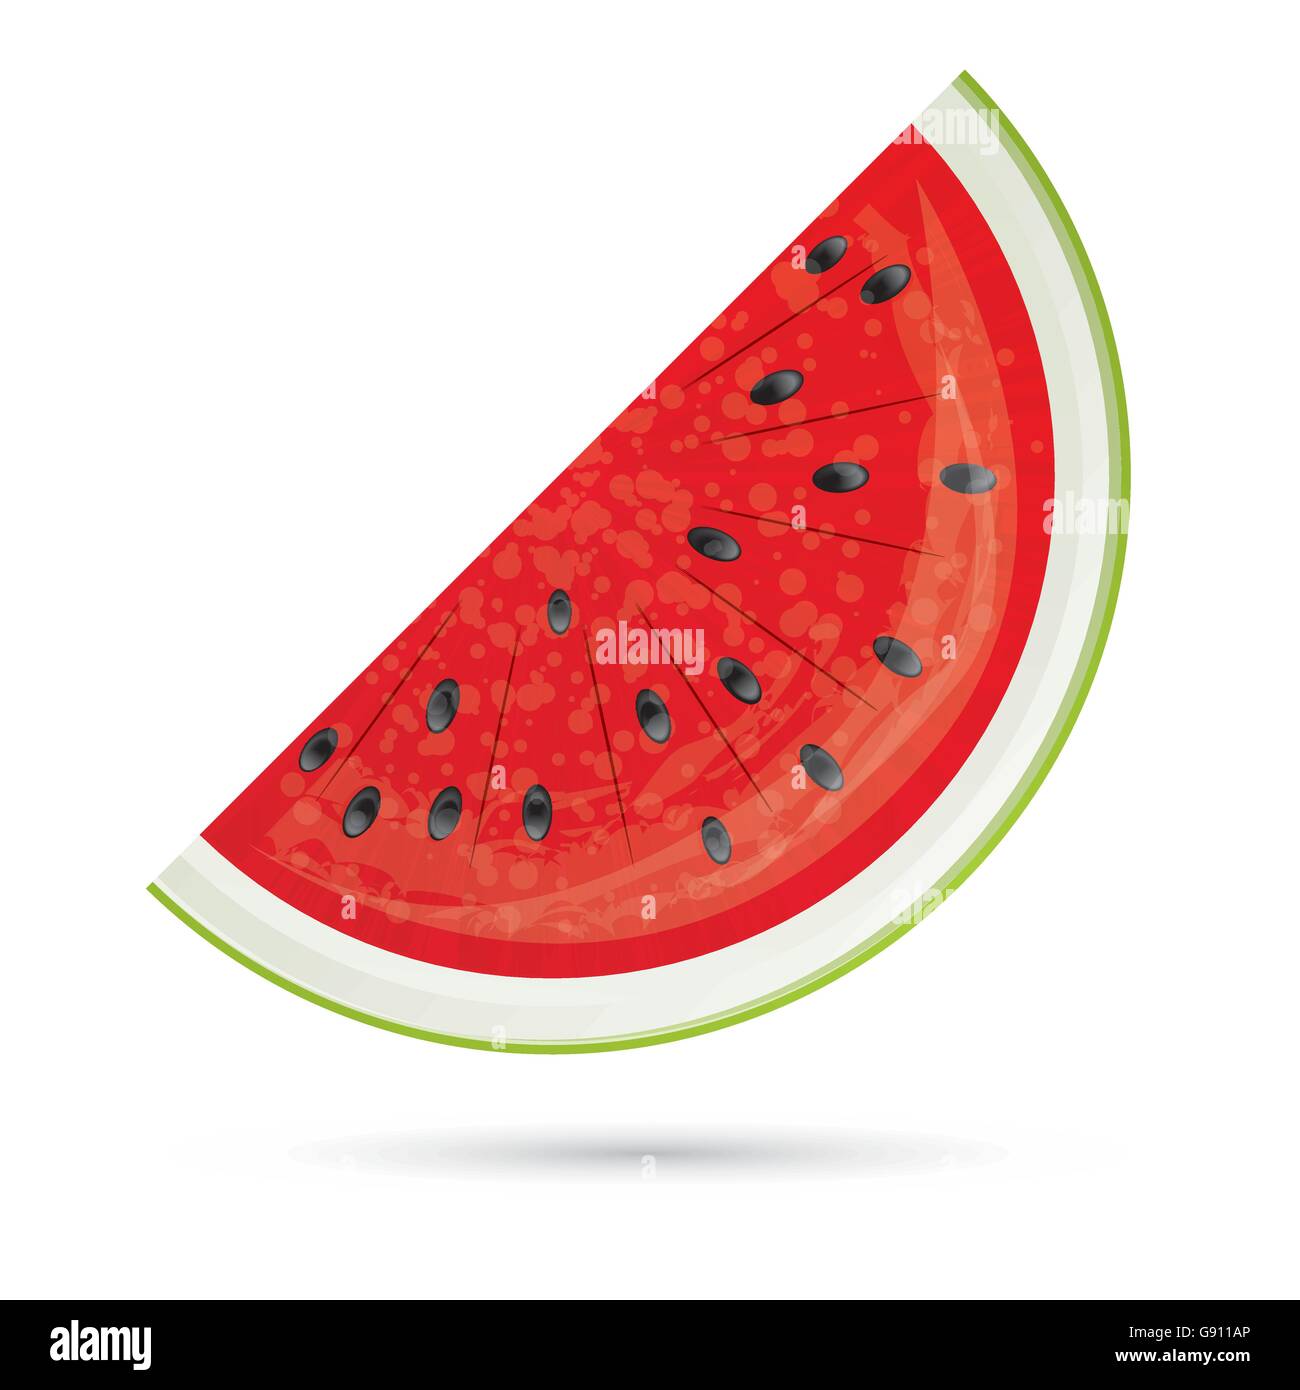 Watermelon slice. Watermelon Icon Isolated on White. Vector Illustration. Red Watermelon with Shadow. Stock Vector